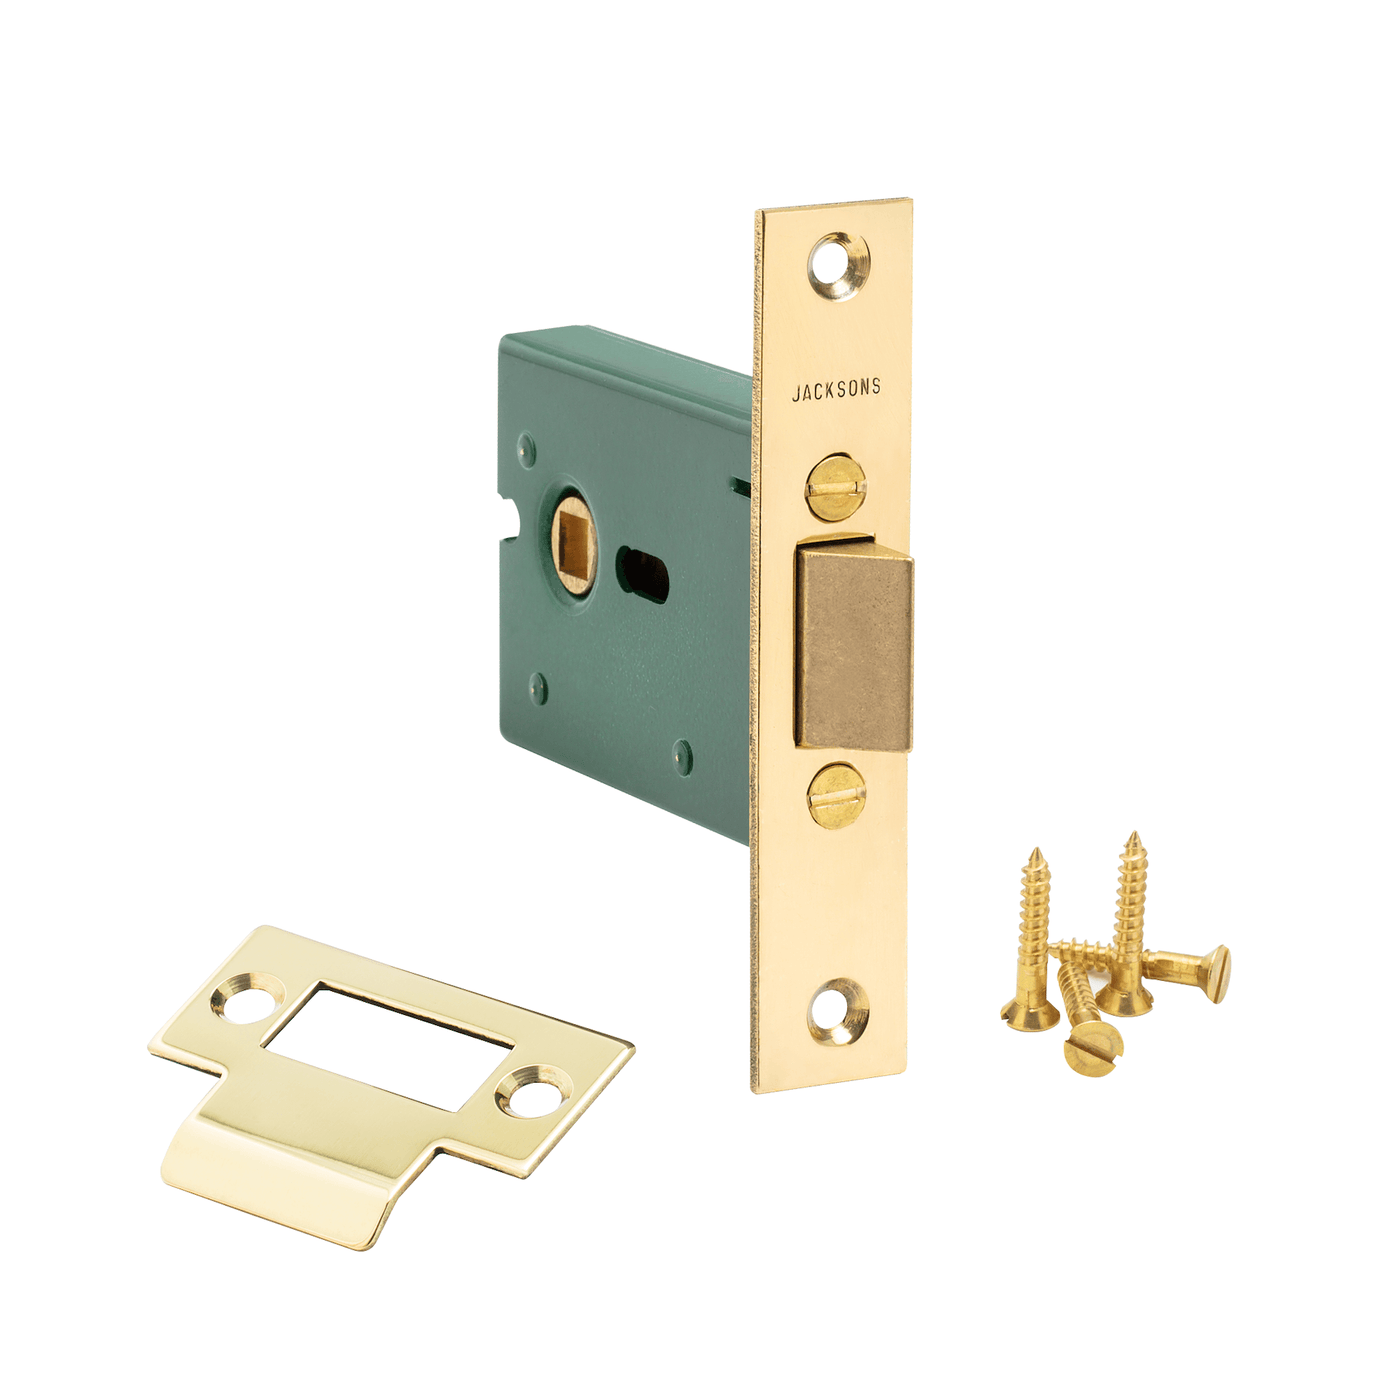 Jacksons Standard Passage Lock Backset with Double Spring & SPL Follower Body with Standard or Rebated Face & Strike Plate Kit